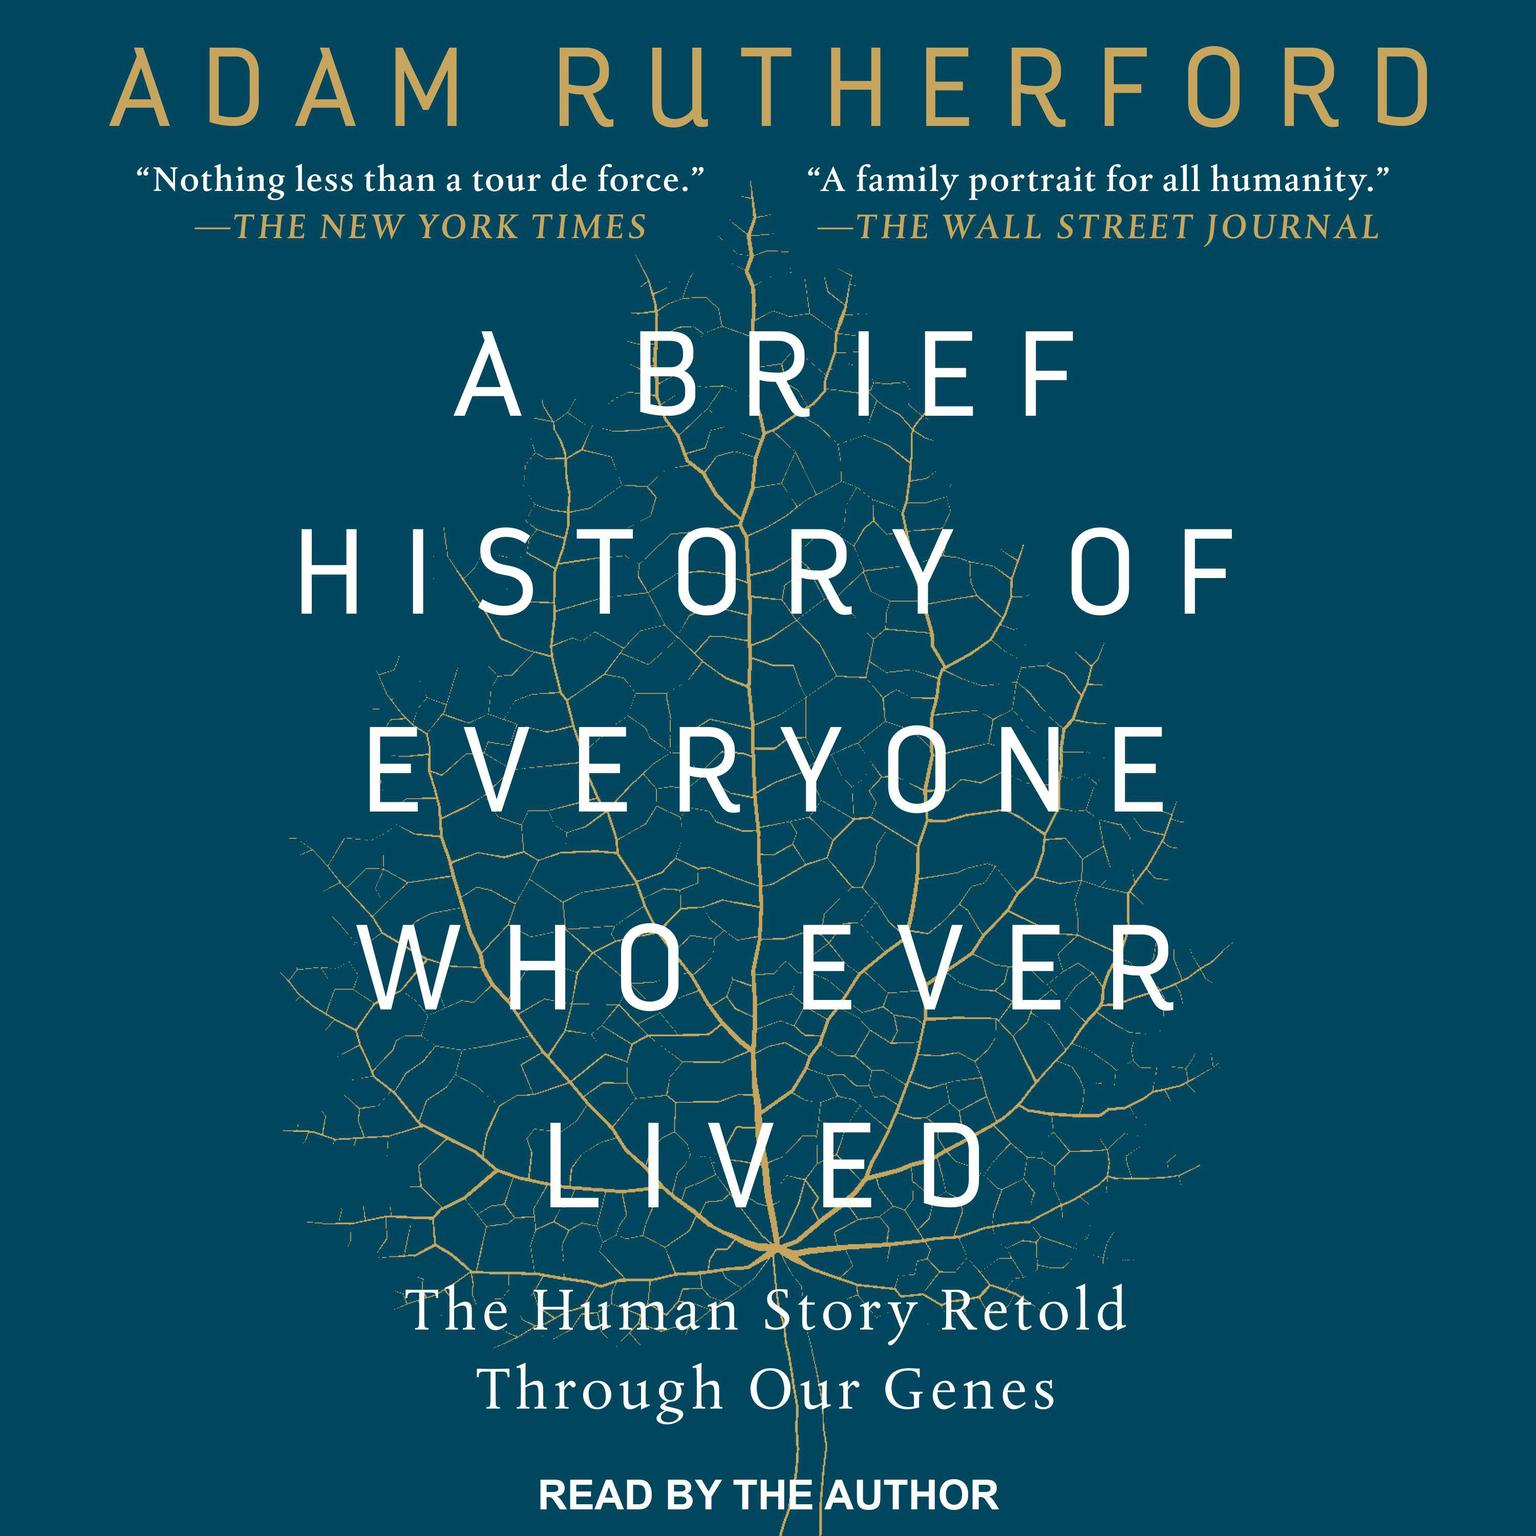 A Brief History of Everyone Who Ever Lived: The Human Story Retold Through Our Genes Audiobook, by Adam Rutherford